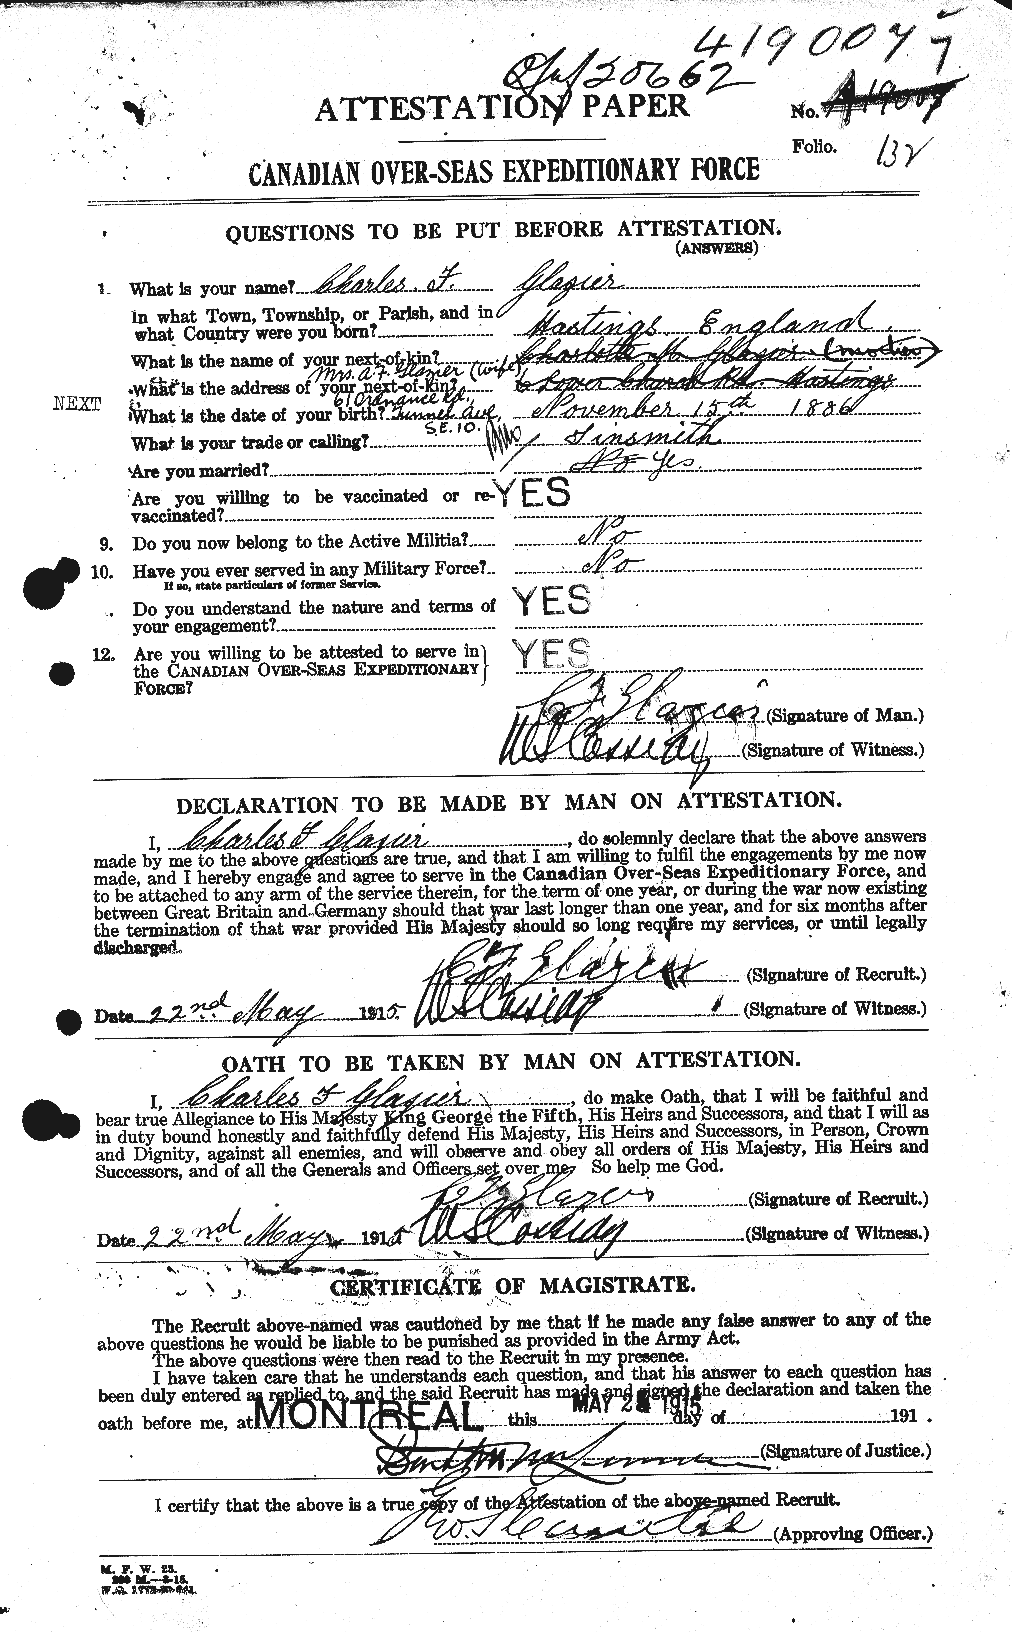 Personnel Records of the First World War - CEF 349982a